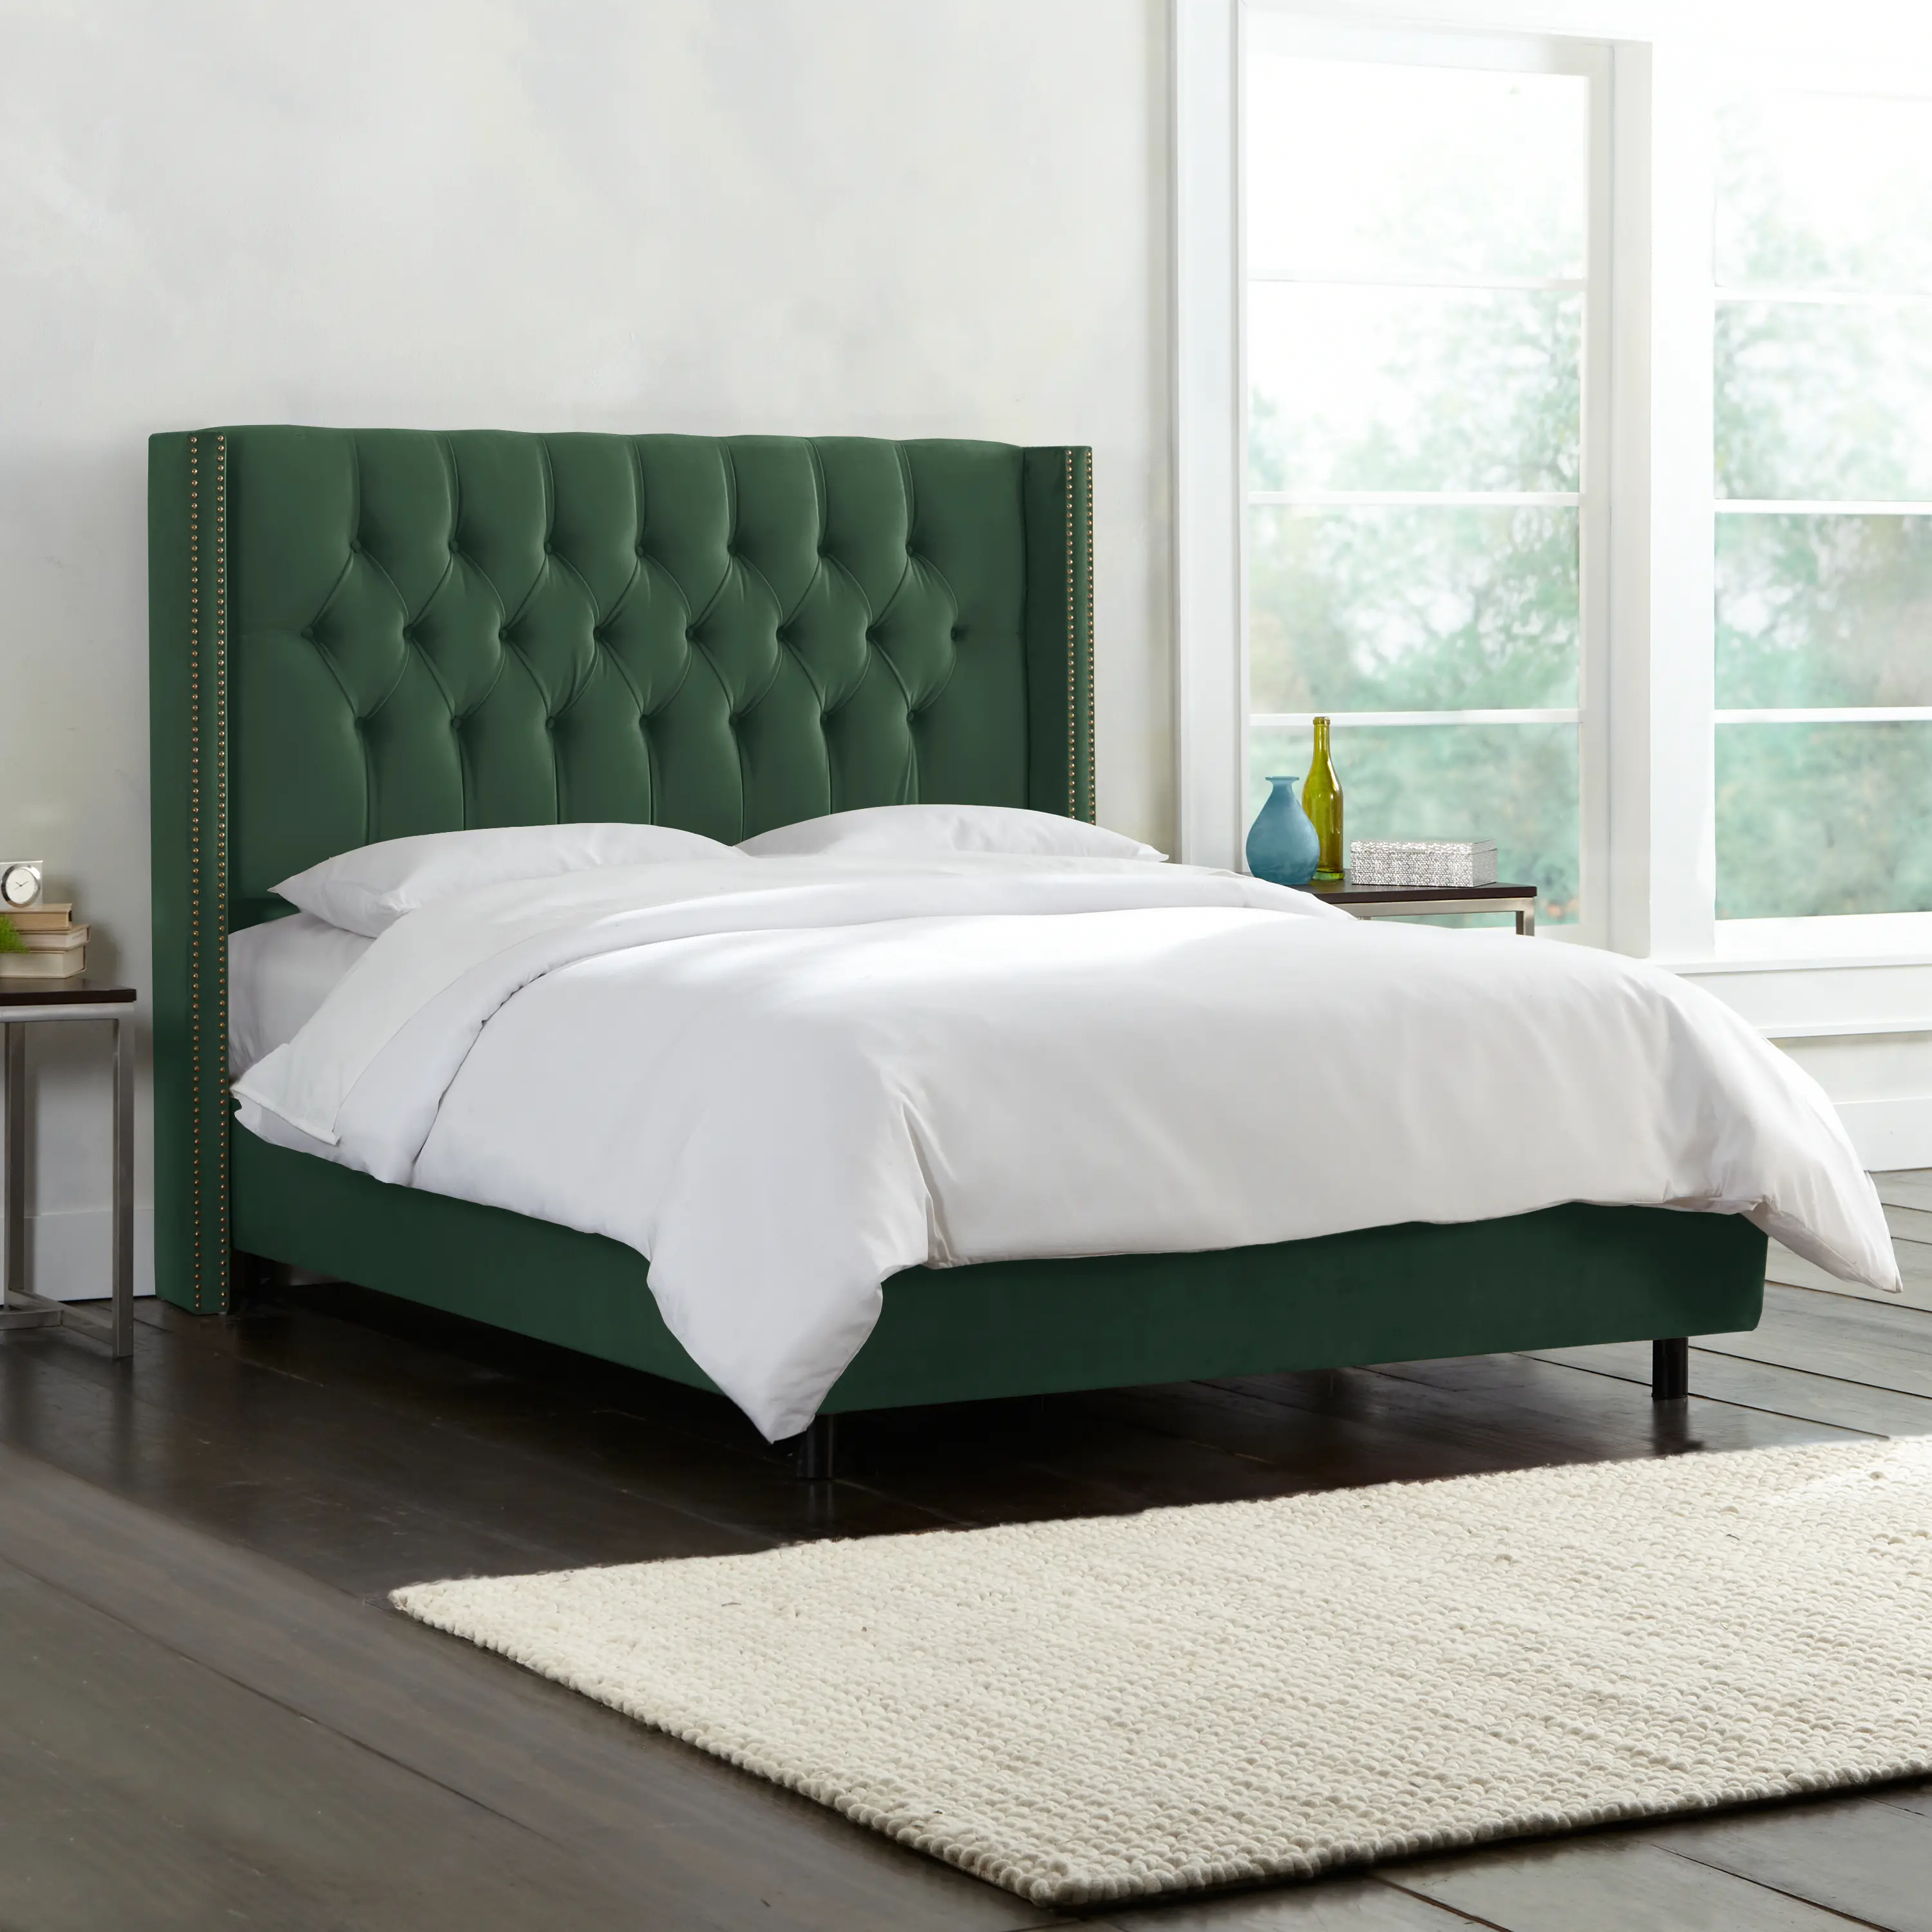 142NBBED-PWMSTJD Abigail Green Diamond Tufted Wingback Queen Bed -  sku 142NBBED-PWMSTJD